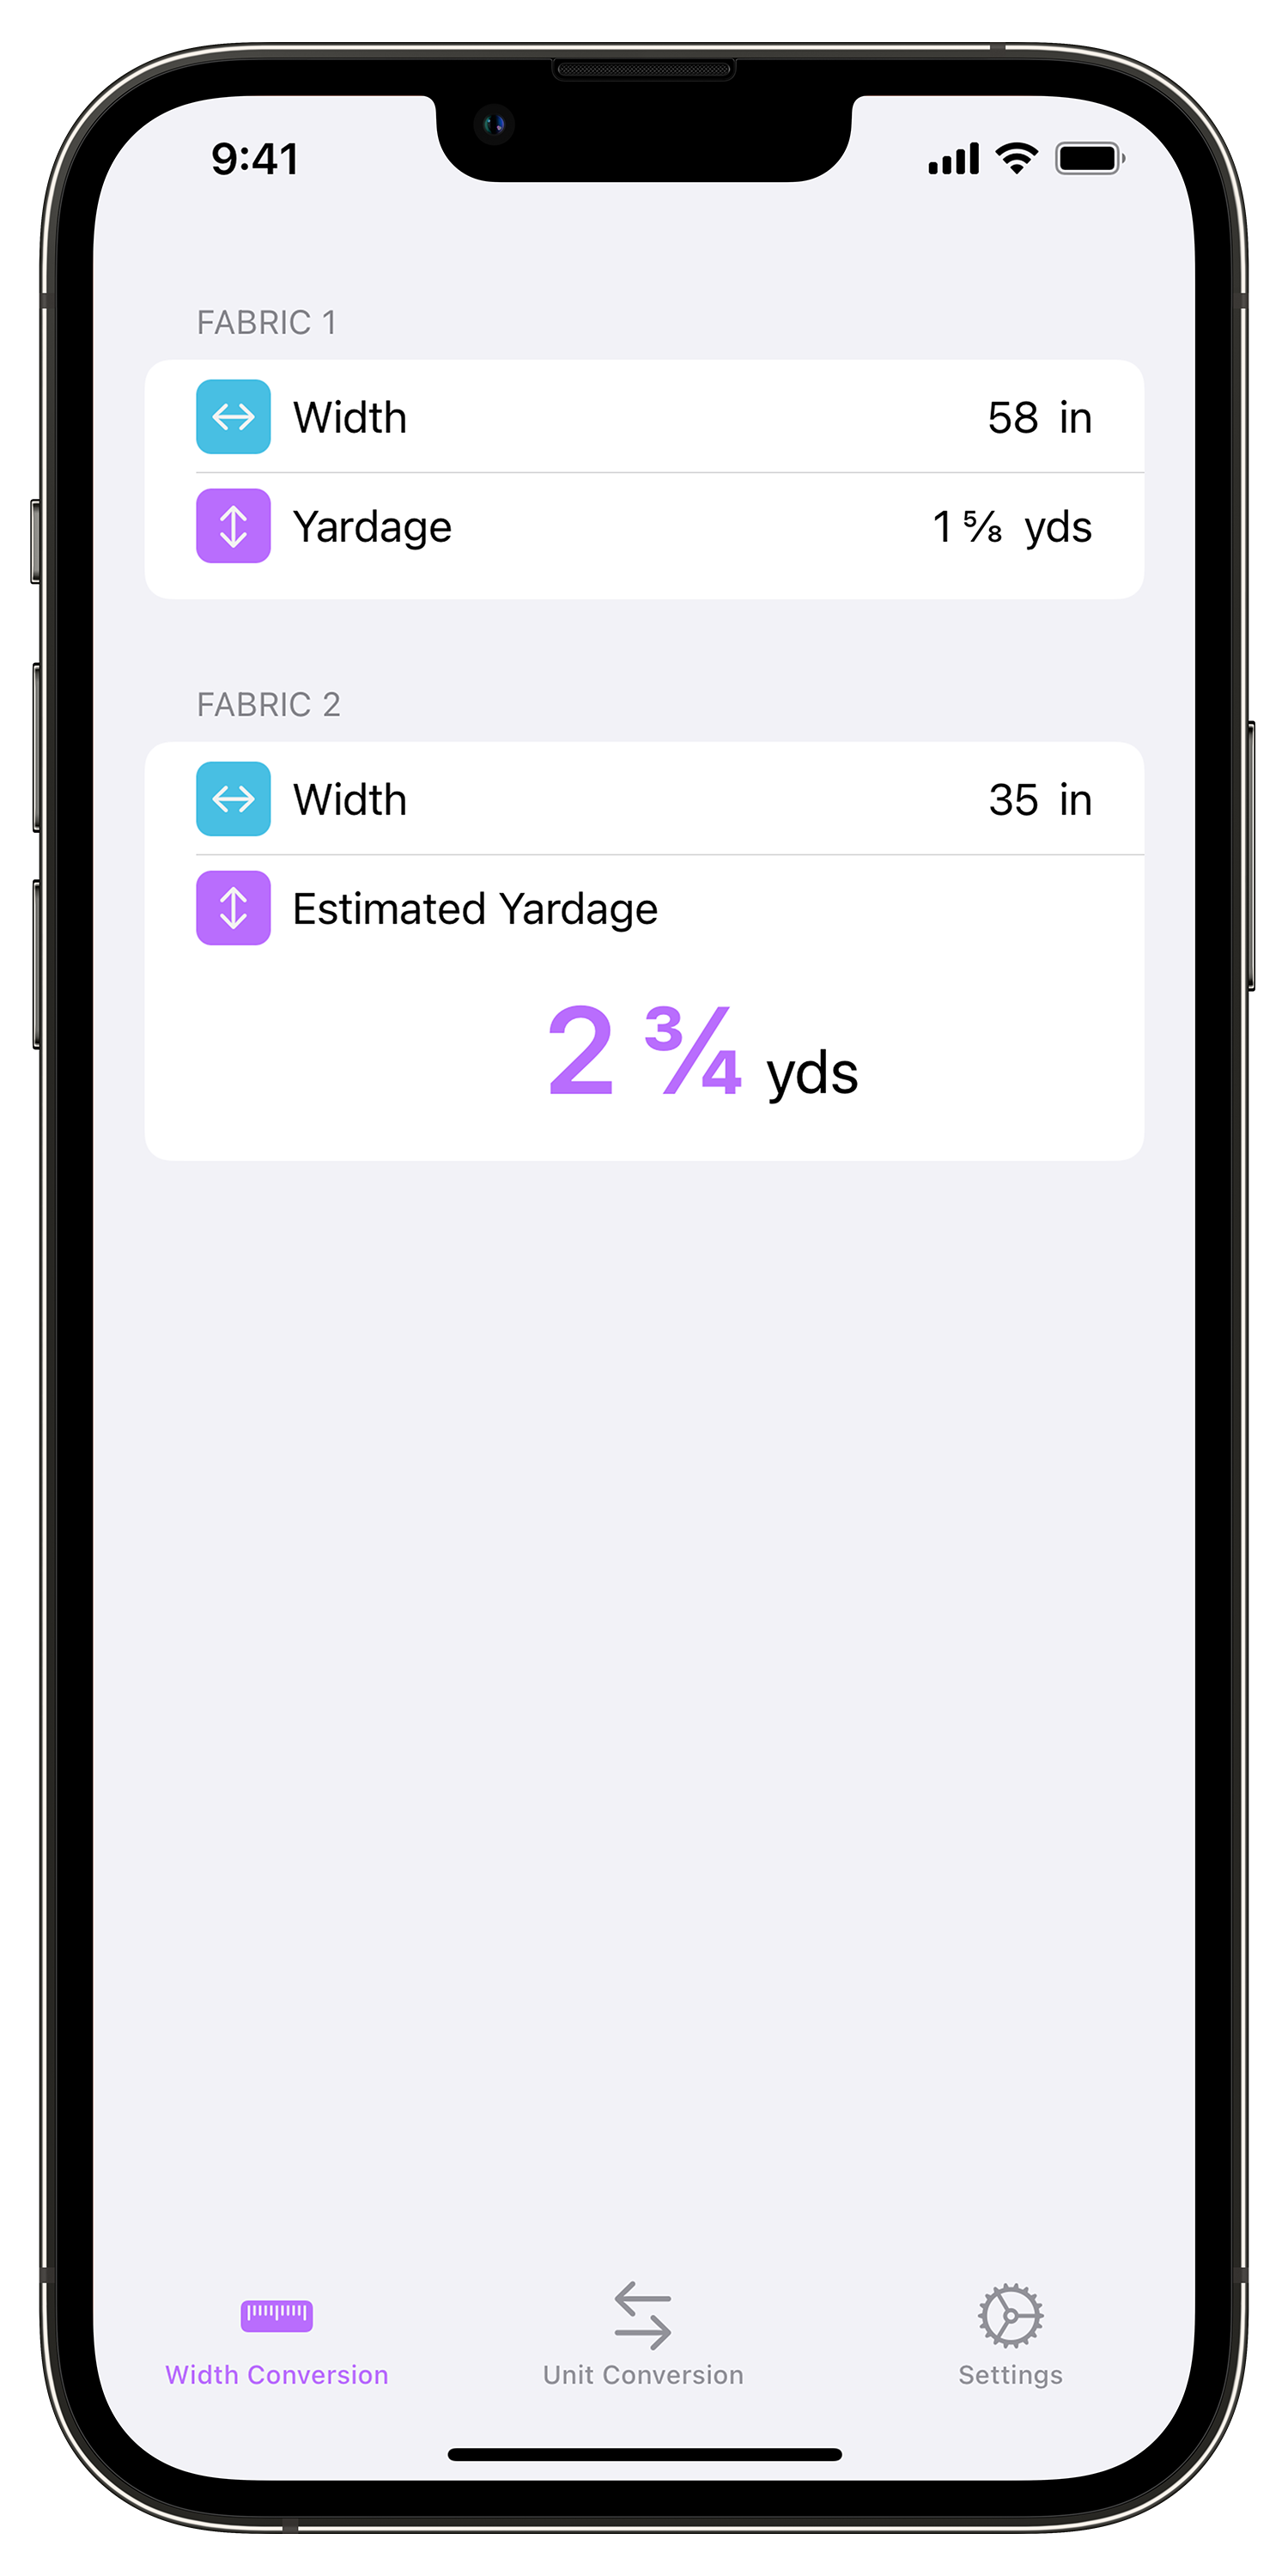 Yardage Calc 2 - Fabric Width Conversion - Imperial Mode